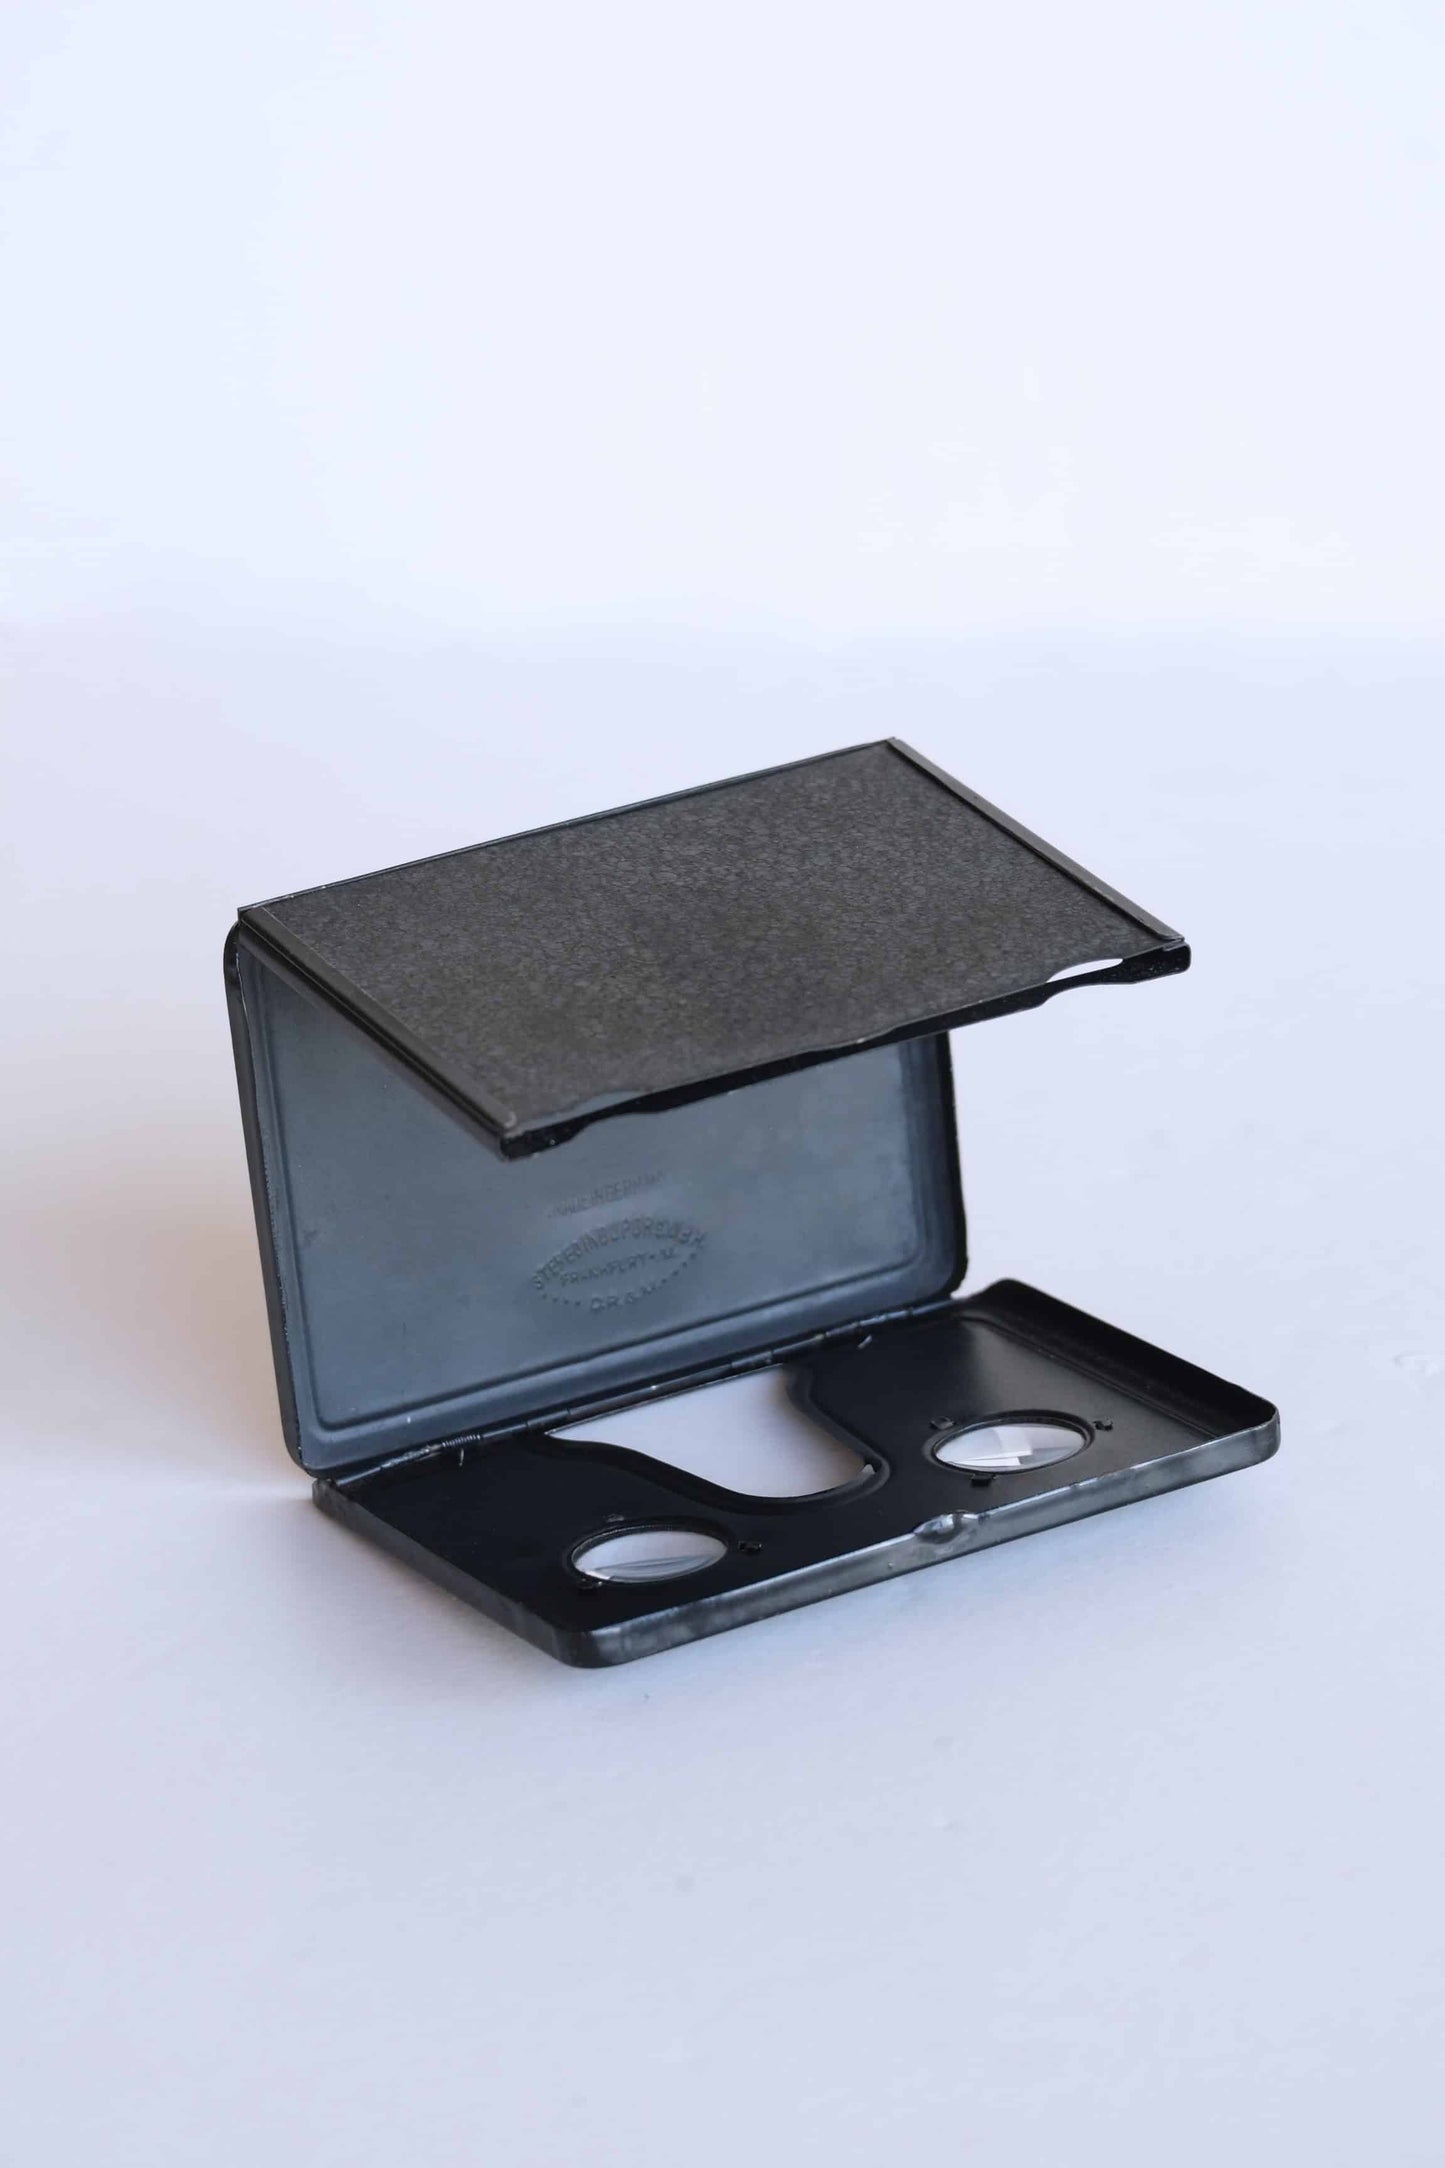 STEREO INDUPOR Folding 3D Viewer Stereoscope open and facing forward on white background